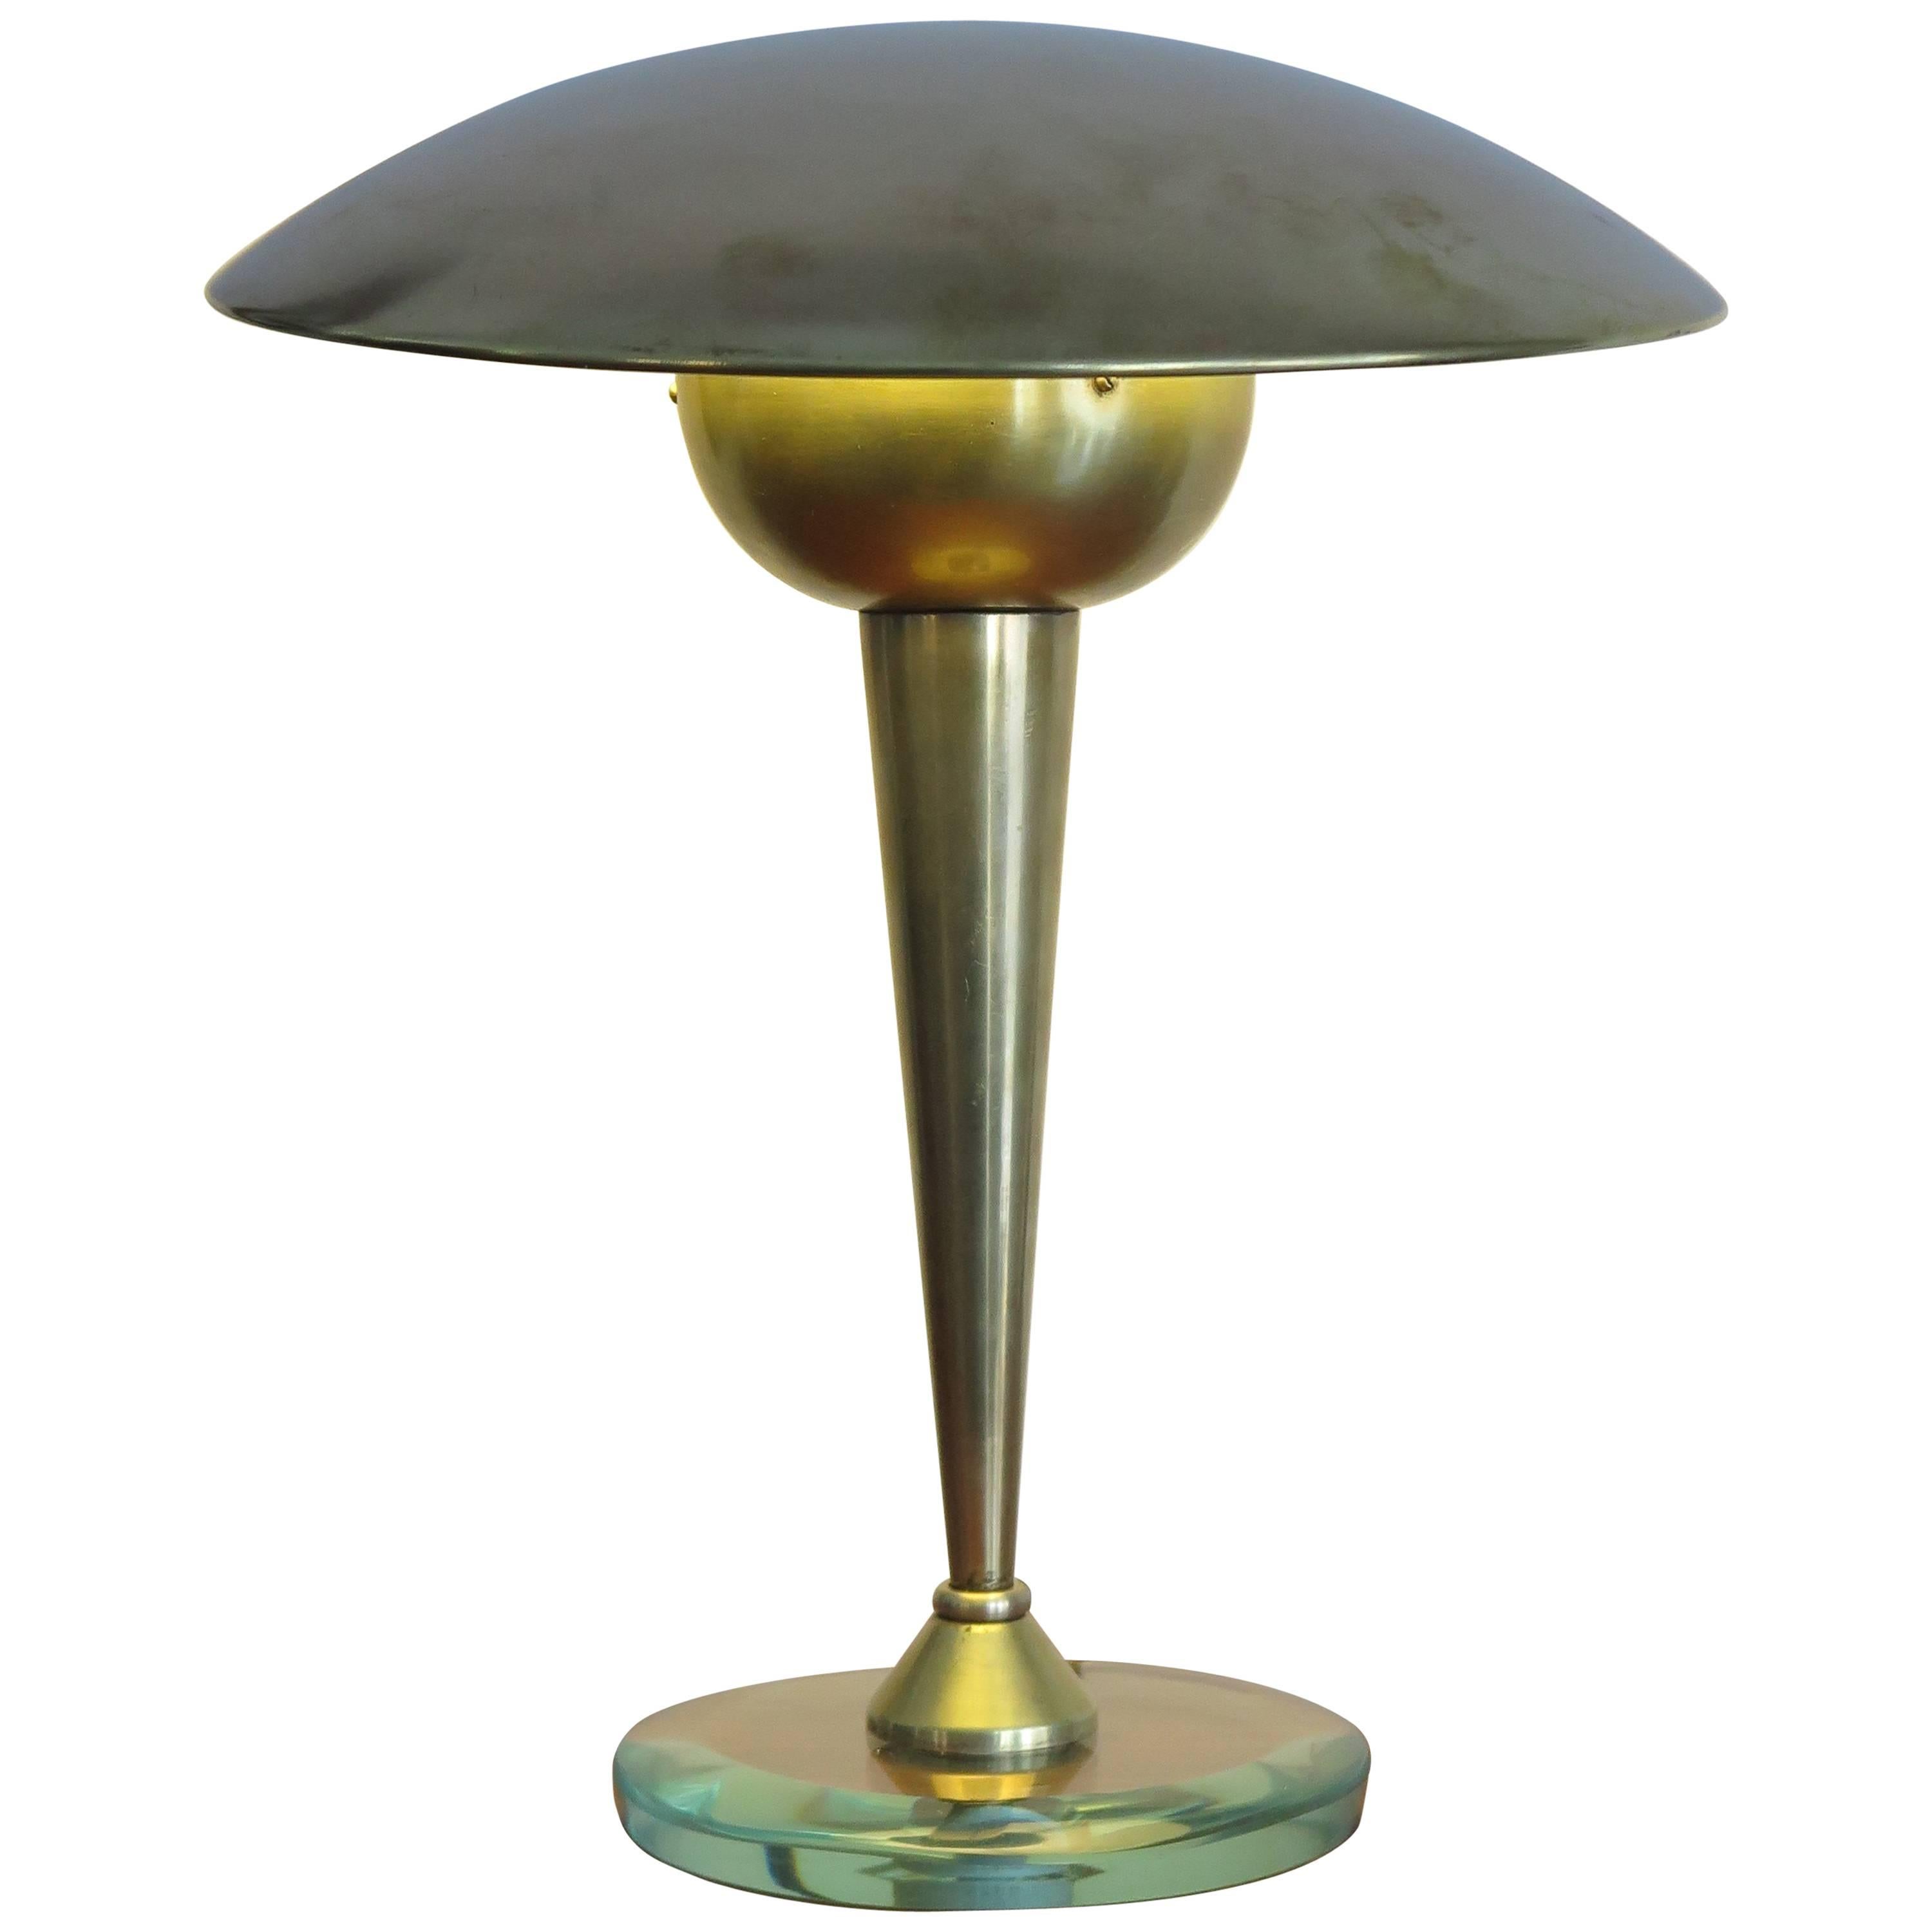 1950s Stilnovo Attributed Mid-Century Modern Brass and Glass Table Lamp